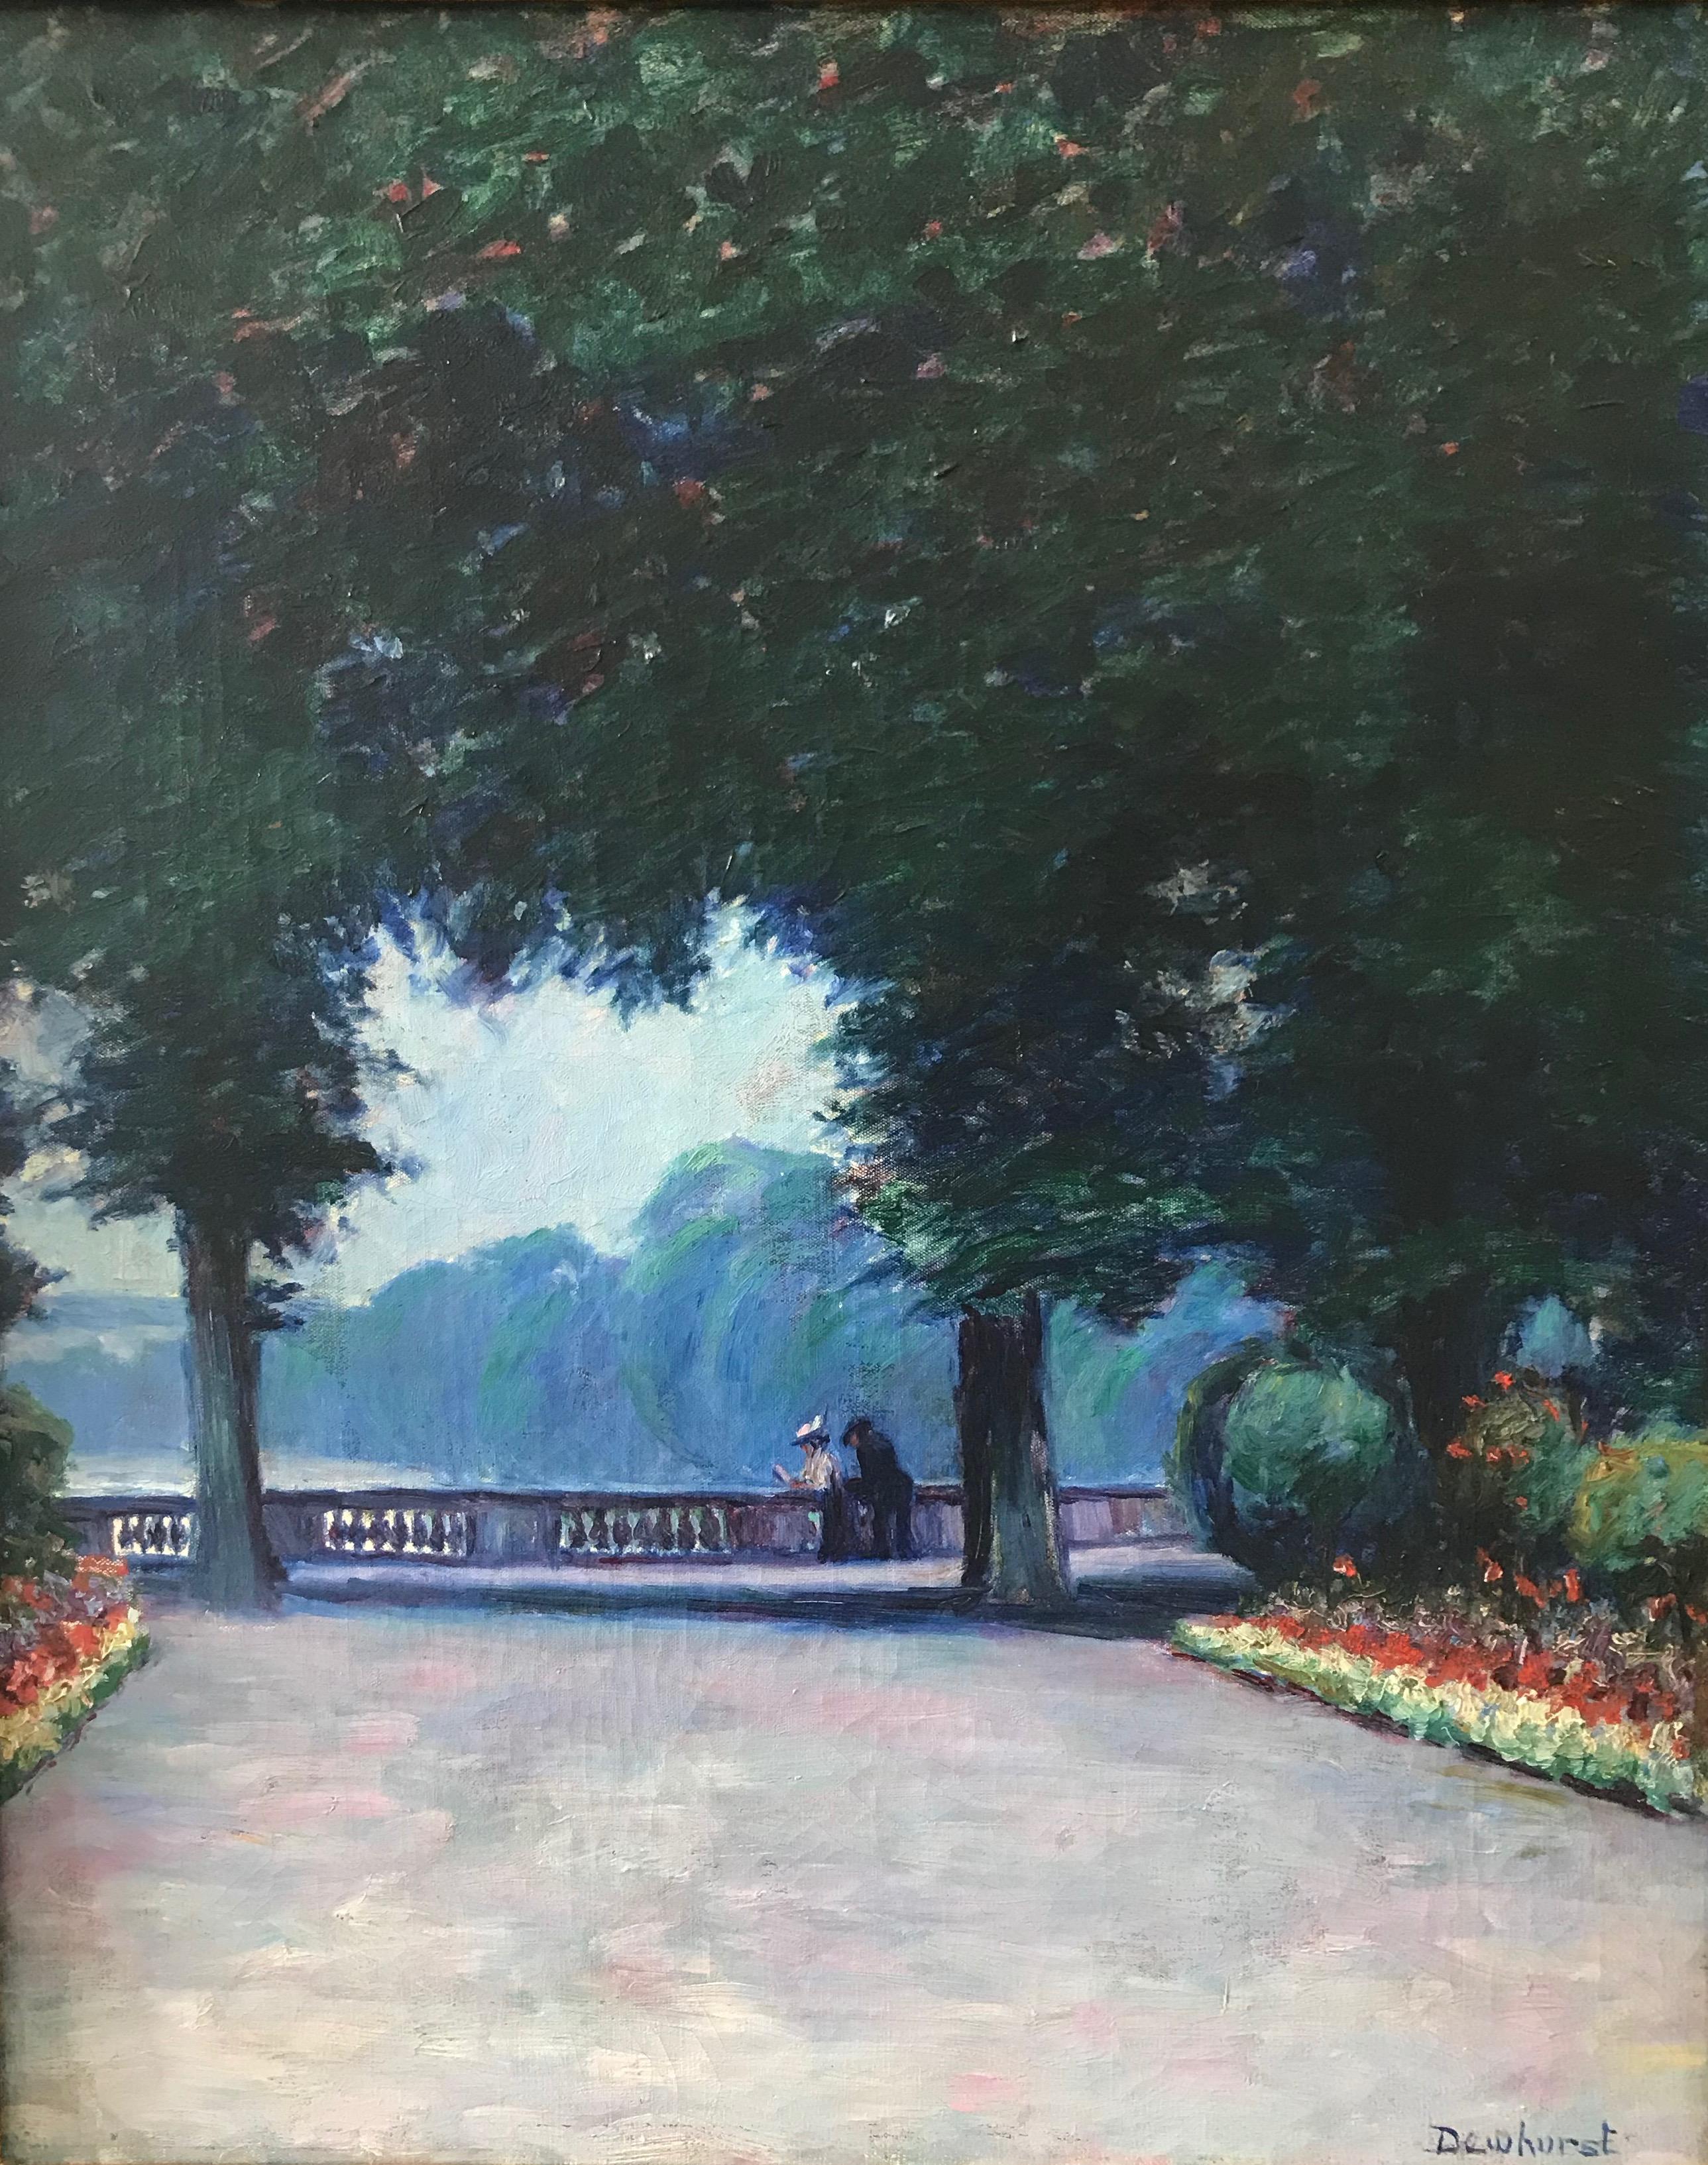 Dewhurst painted several paintings of the park surrounding the palace of Versailles. In this example, the dramatic foliage of the trees and avenue of summer blooms lead the eye to a couple engaged in conversation on the balustrade.

Wynford Dewhurst